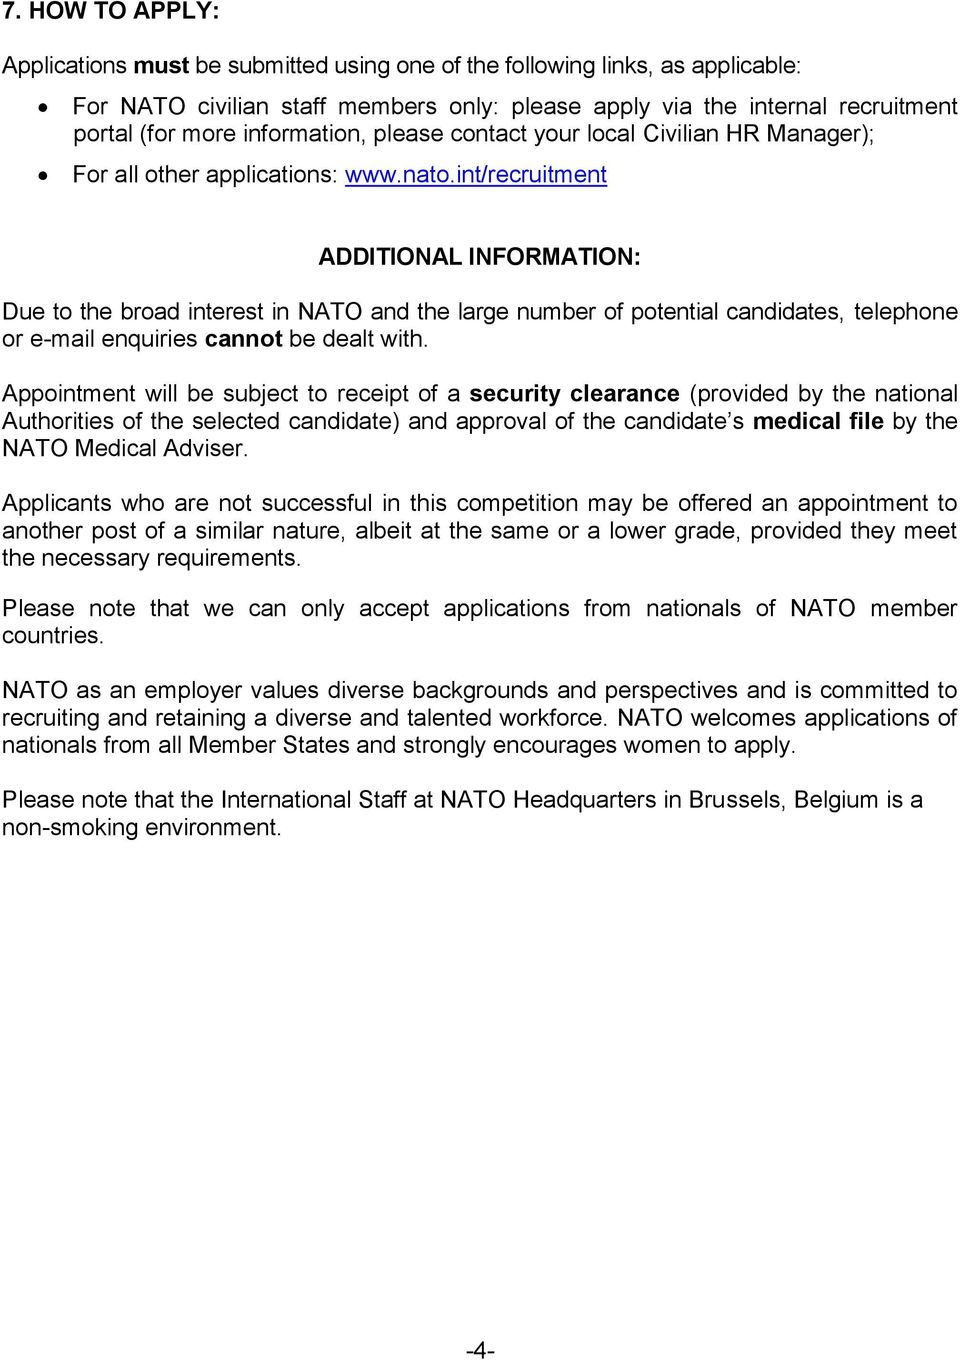 int/recruitment ADDITIONAL INFORMATION: Due to the broad interest in NATO and the large number of potential candidates, telephone or e-mail enquiries cannot be dealt with.